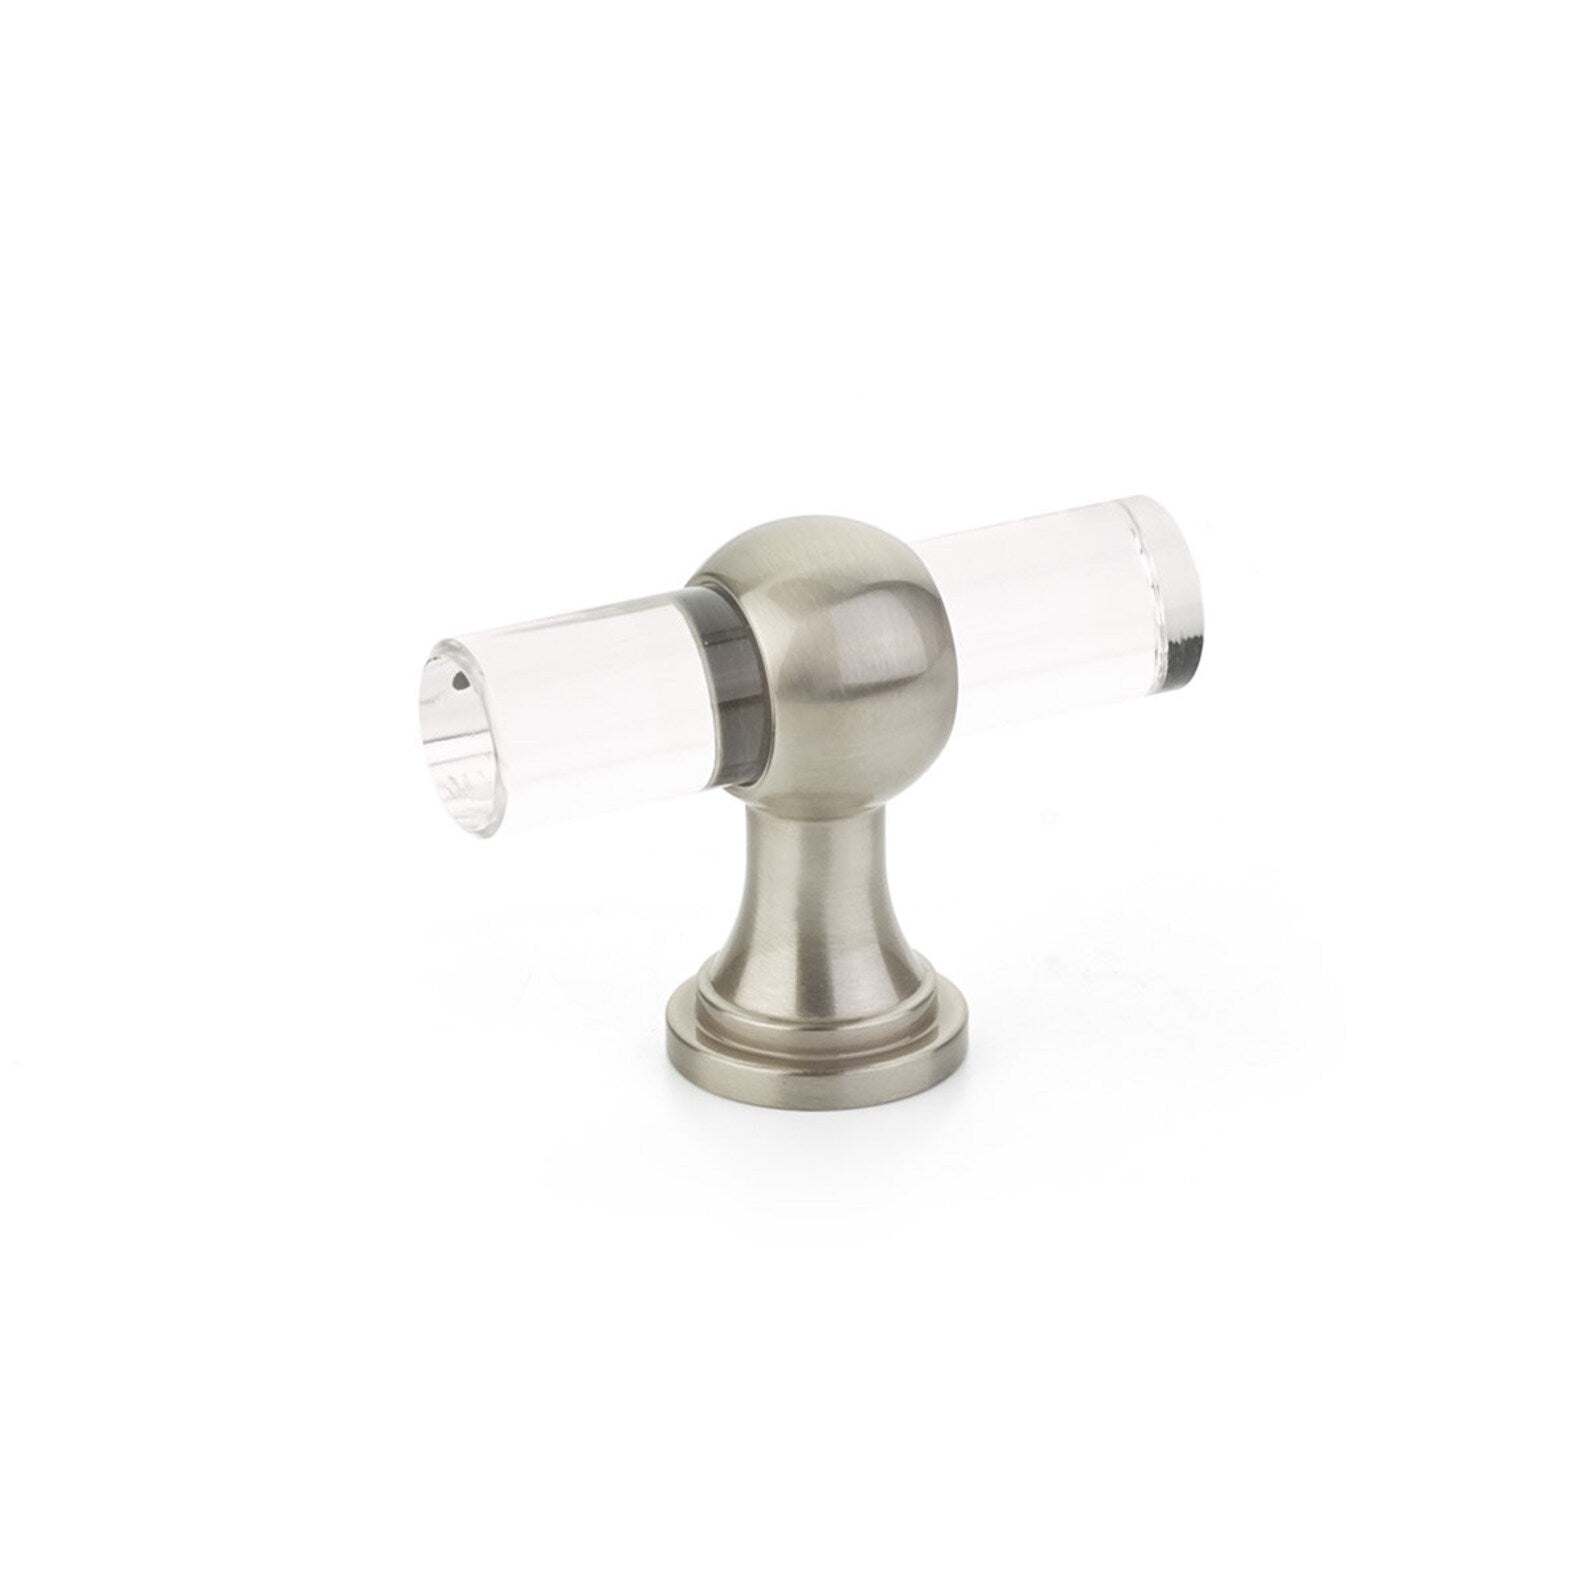 Satin Nickel and Lucite "Gleam" Cabinet Knobs and Drawer Pulls (Adjustable) - Forge Hardware Studio